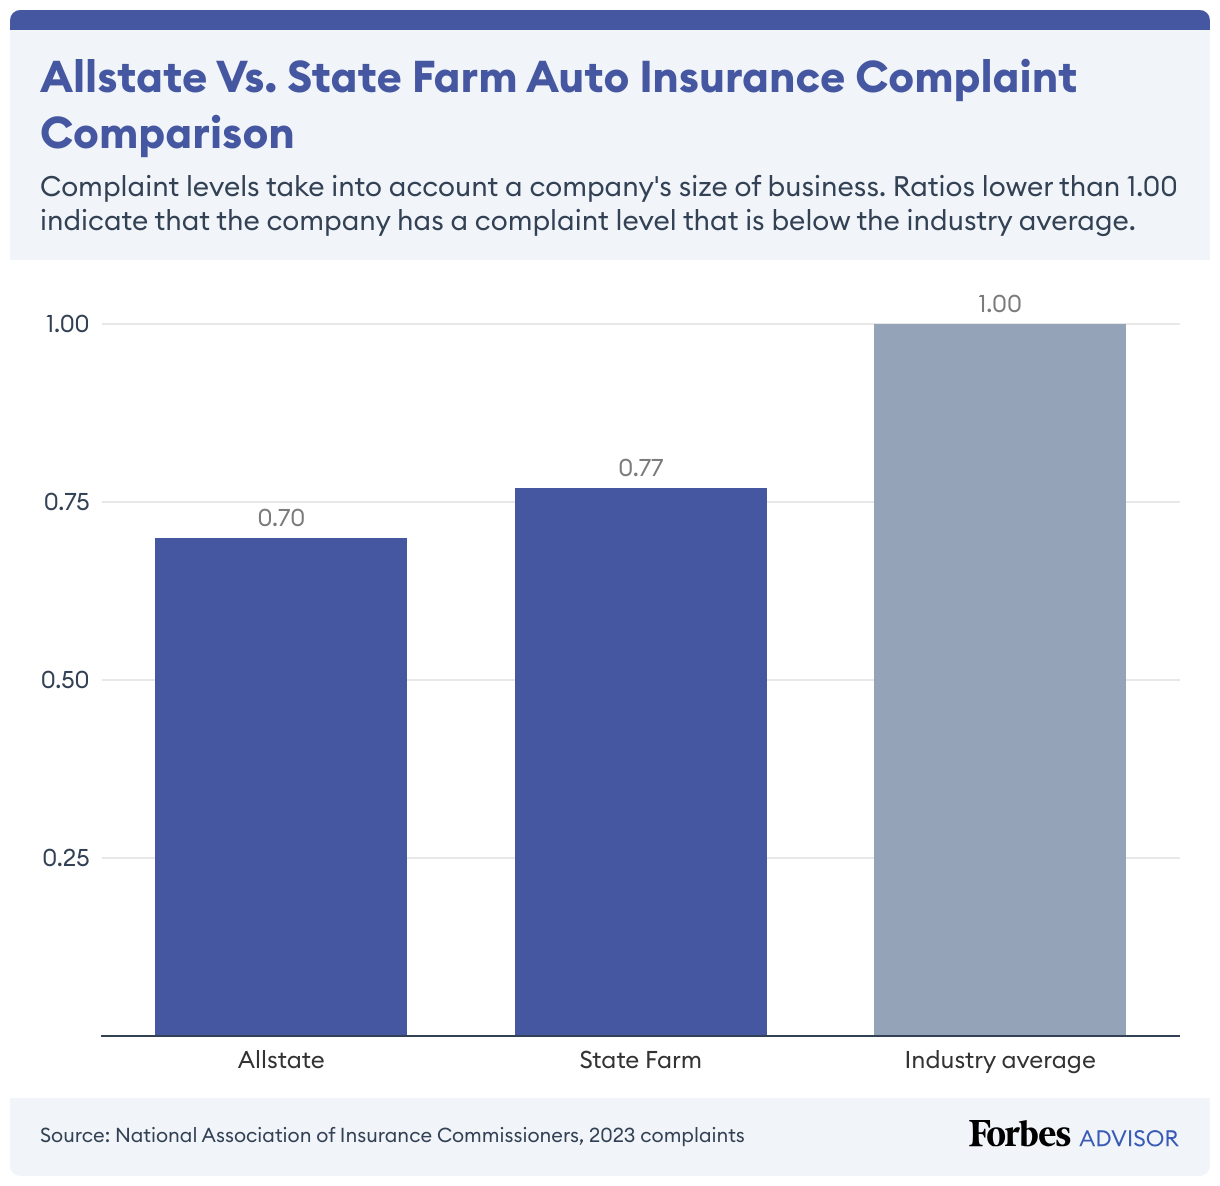 State Farm's complaint level is a little higher than Allstate's but still lower than the industry average.